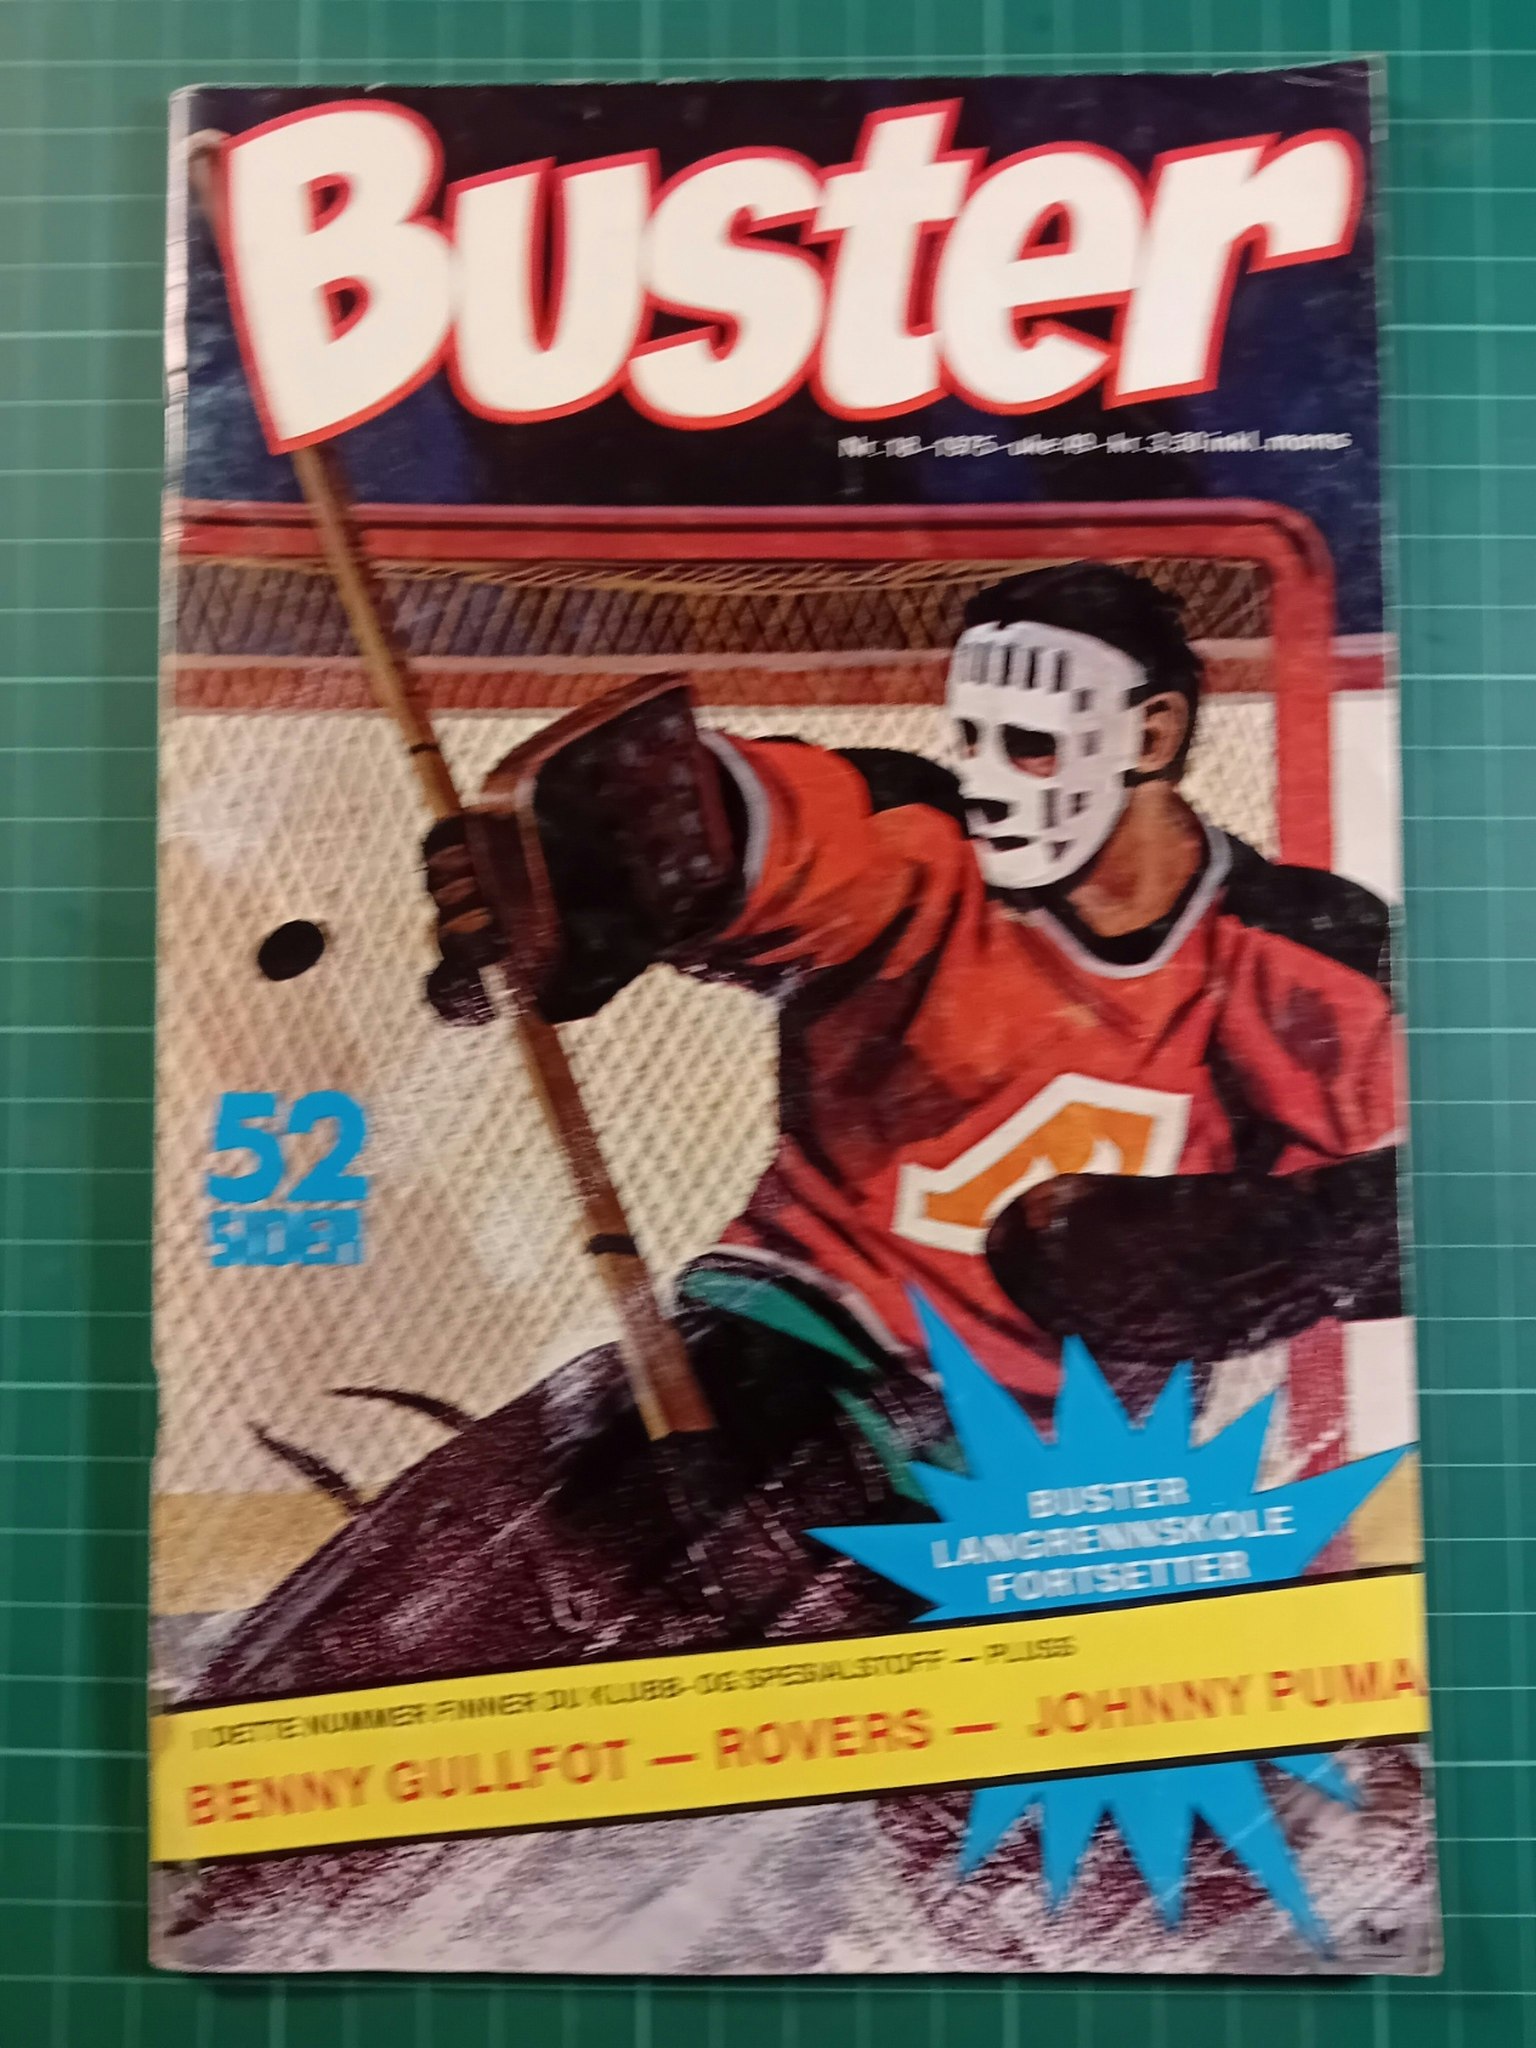 Buster 1975 - 18